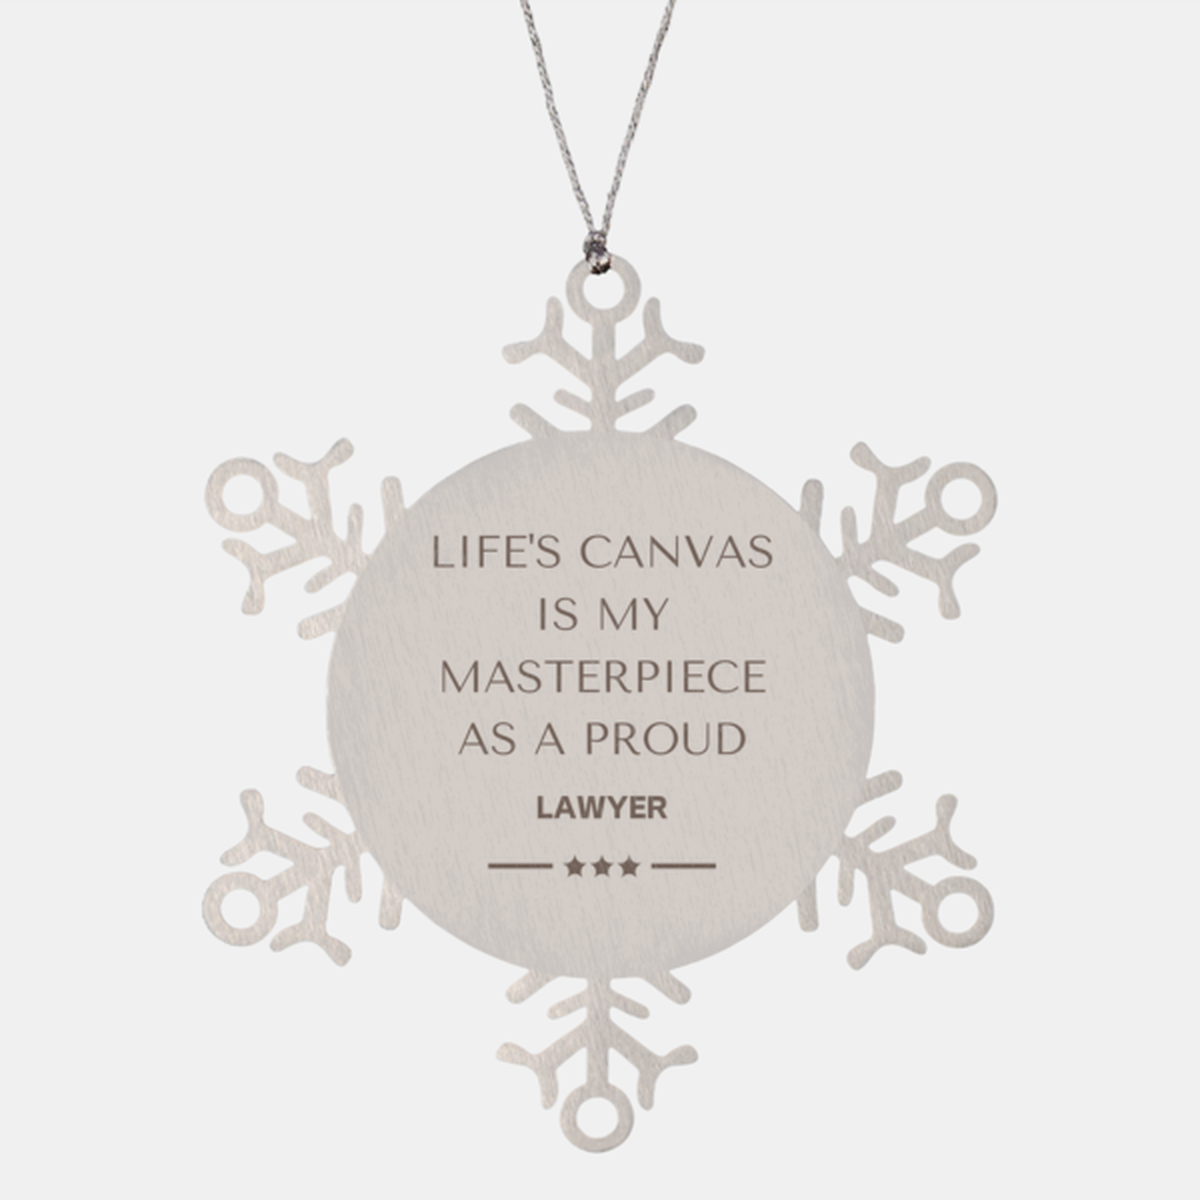 Proud Lawyer Gifts, Life's canvas is my masterpiece, Epic Birthday Christmas Unique Snowflake Ornament For Lawyer, Coworkers, Men, Women, Friends